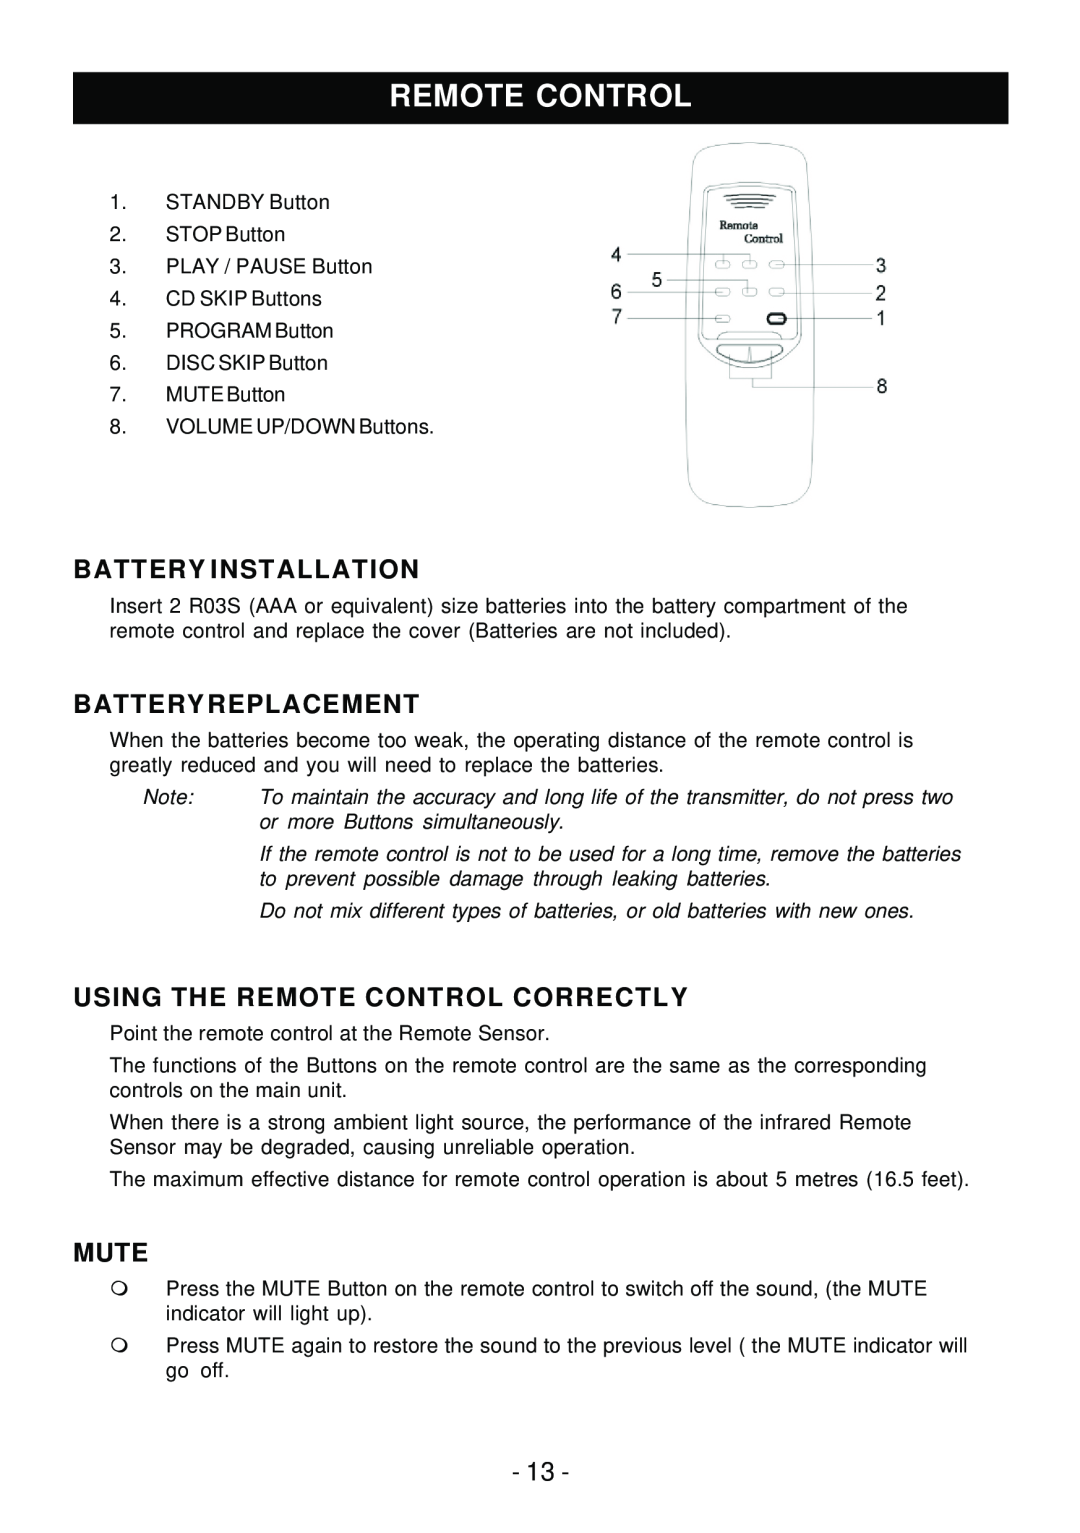 Sylvania SRCD858 instruction manual Battery Installation, Batteryreplacement, Using The Remote Control Correctly, Mute 